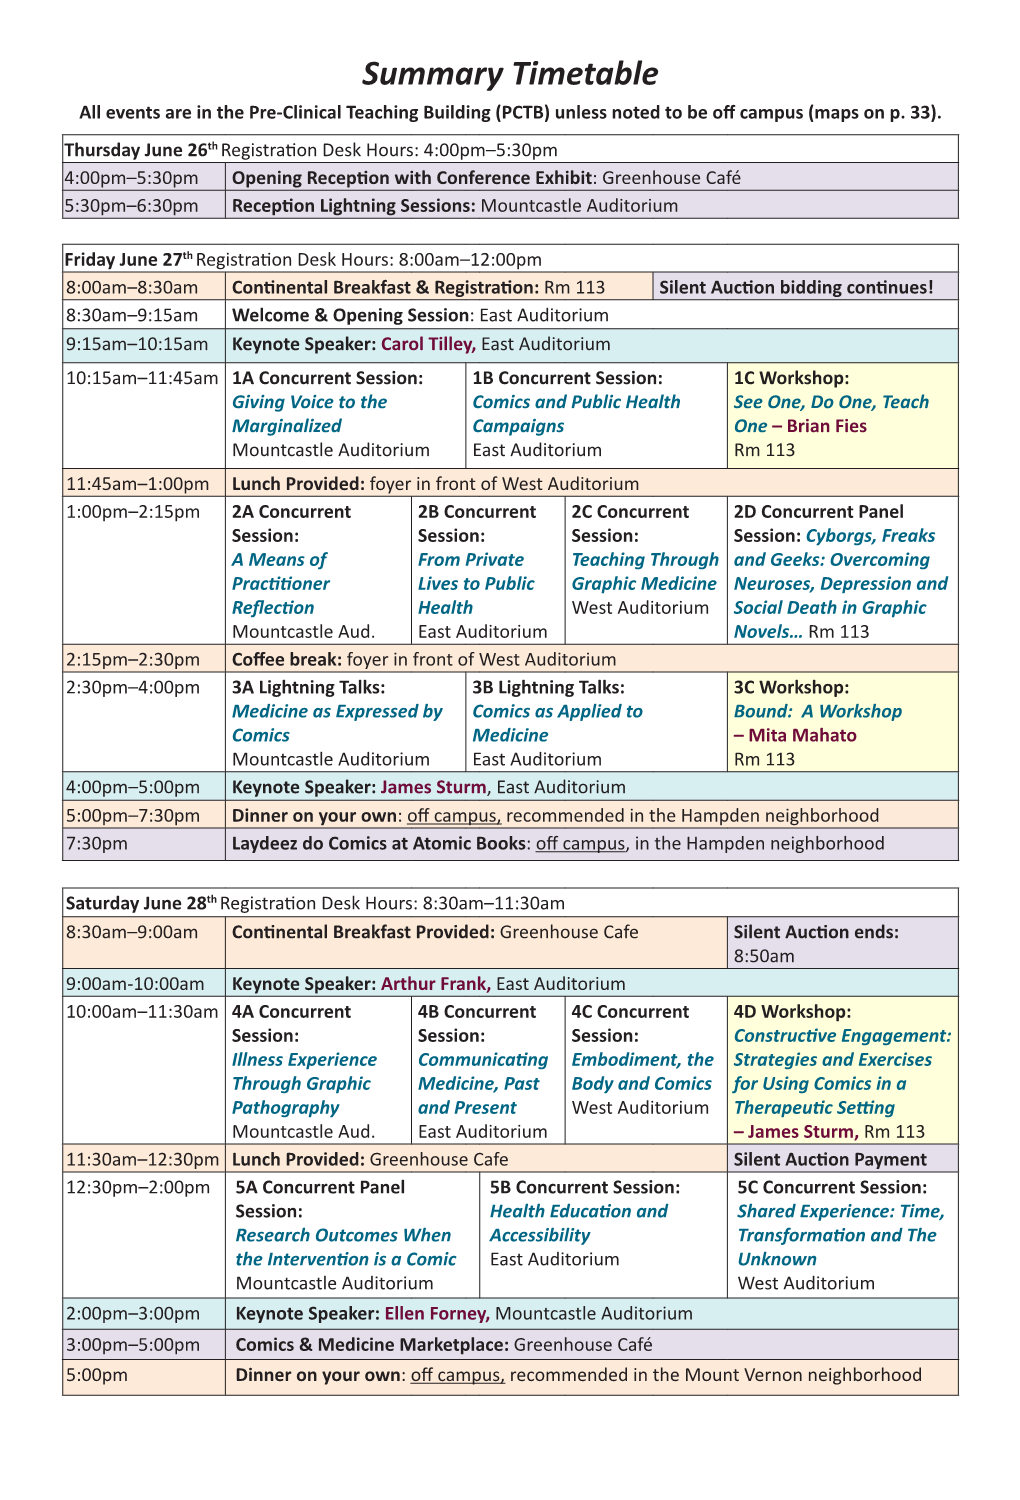 Summary Timetable All Events Are in the Pre-Clinical Teaching Building (PCTB) Unless Noted to Be Off Campus (Maps on P